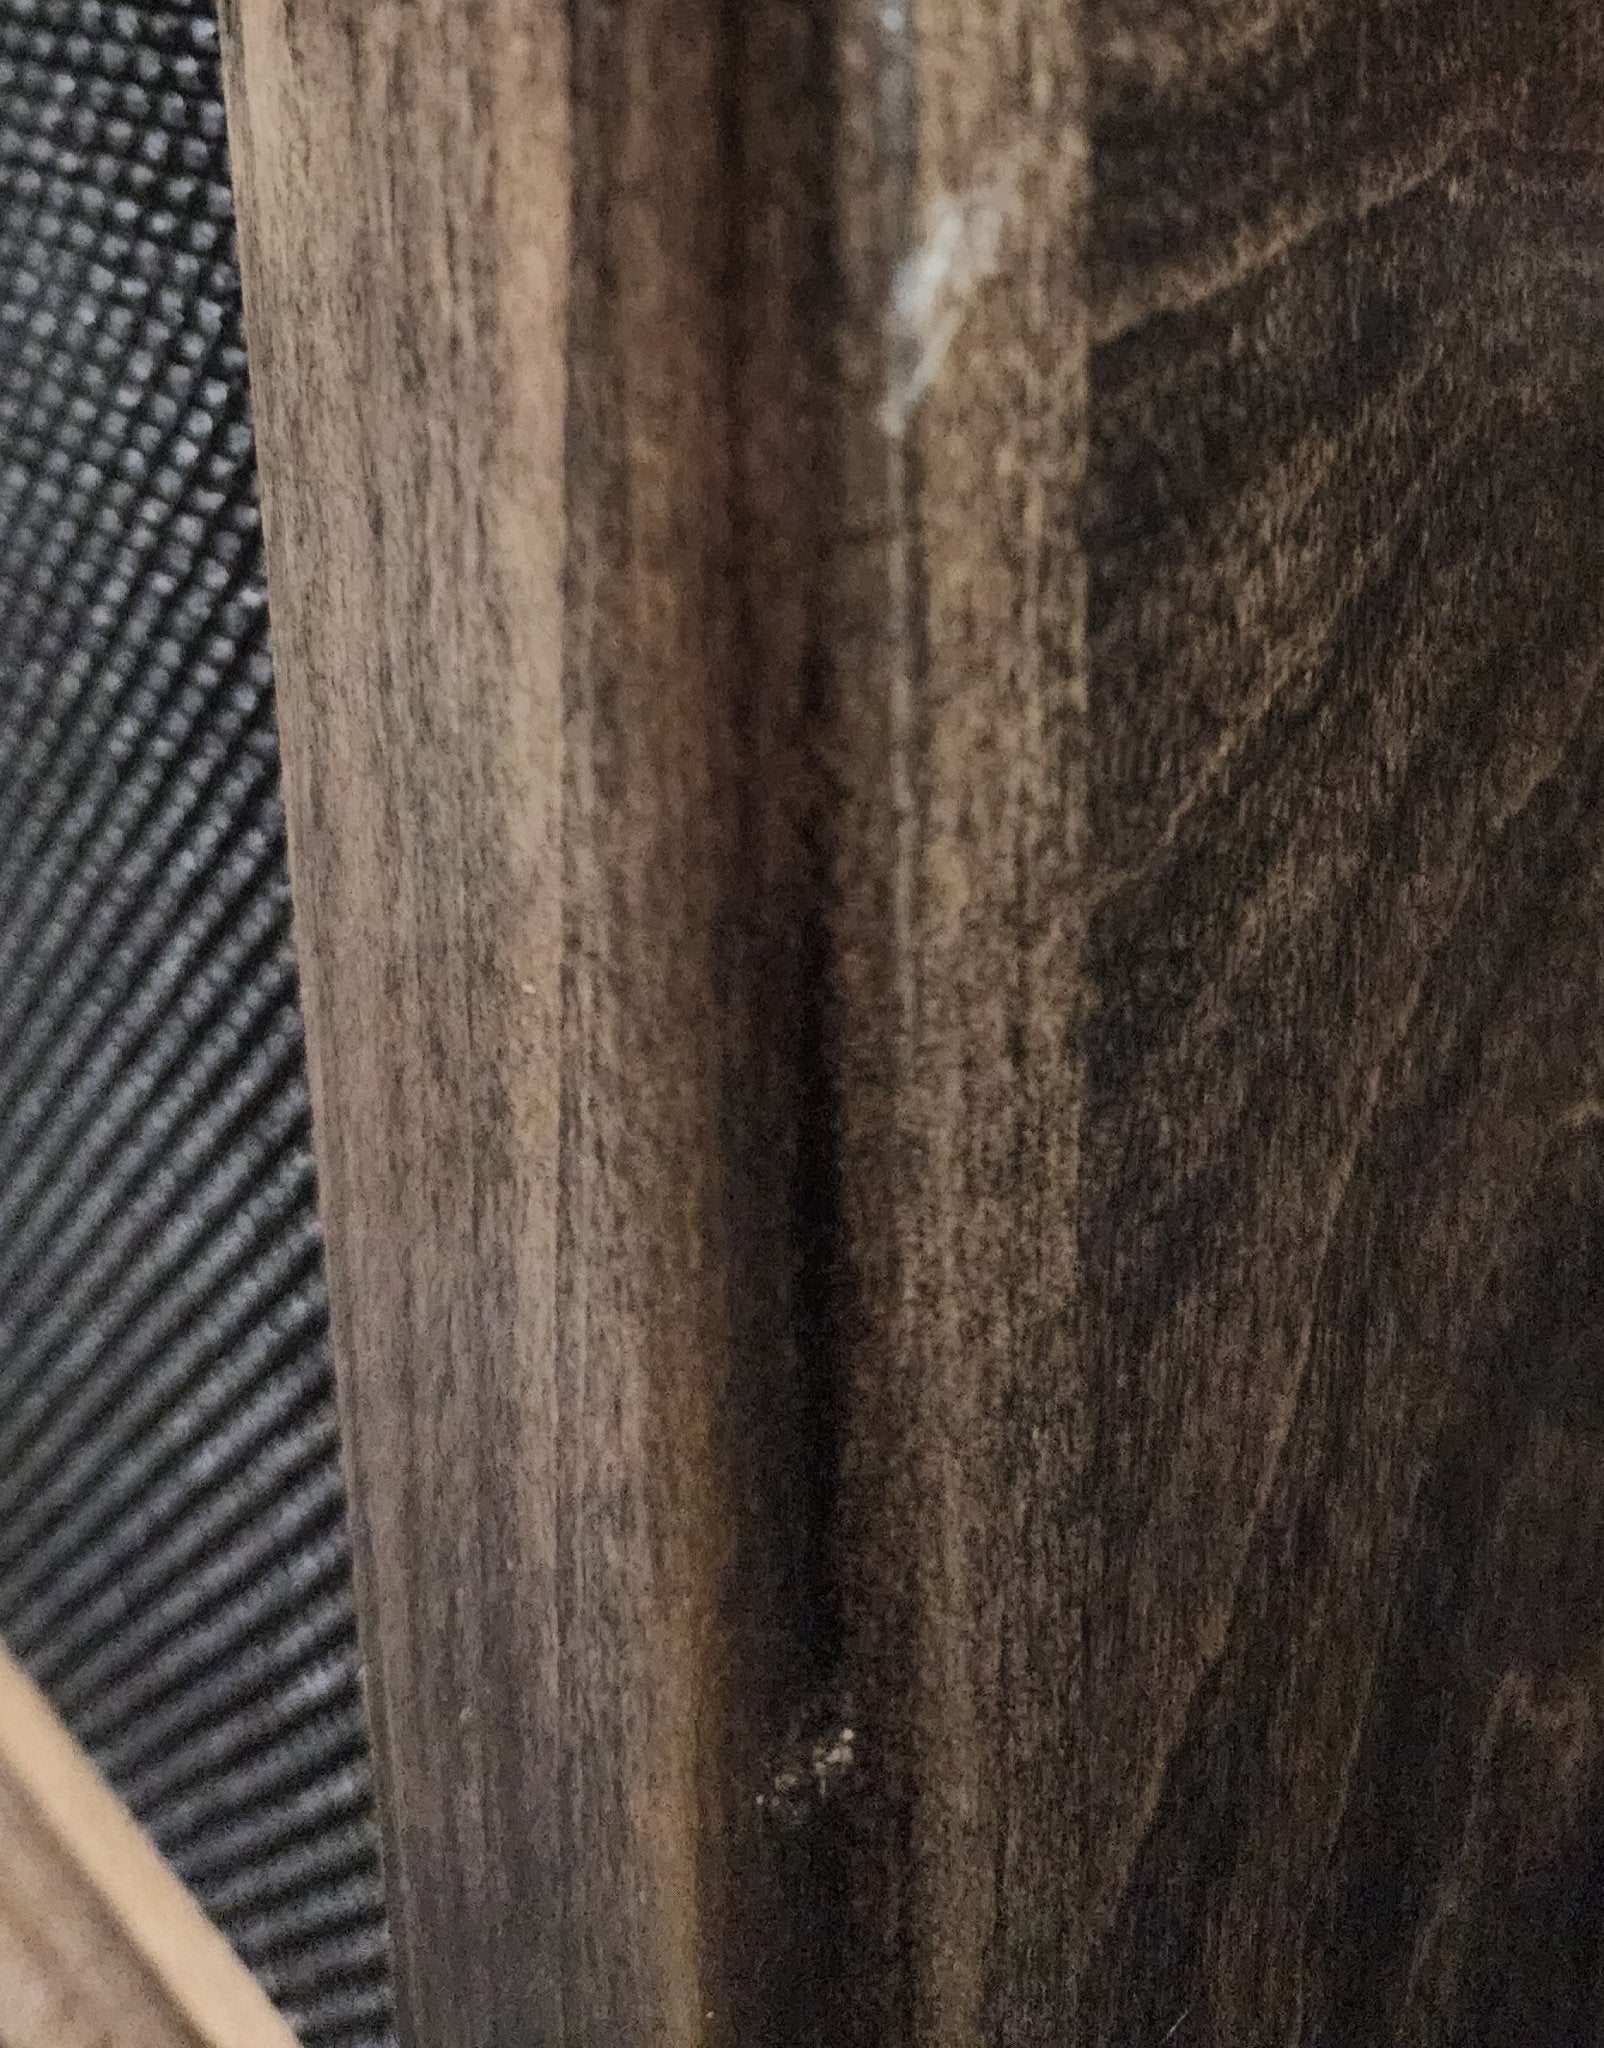 Used 1x15 XL Bass Cabinet - Emperor Cabinets